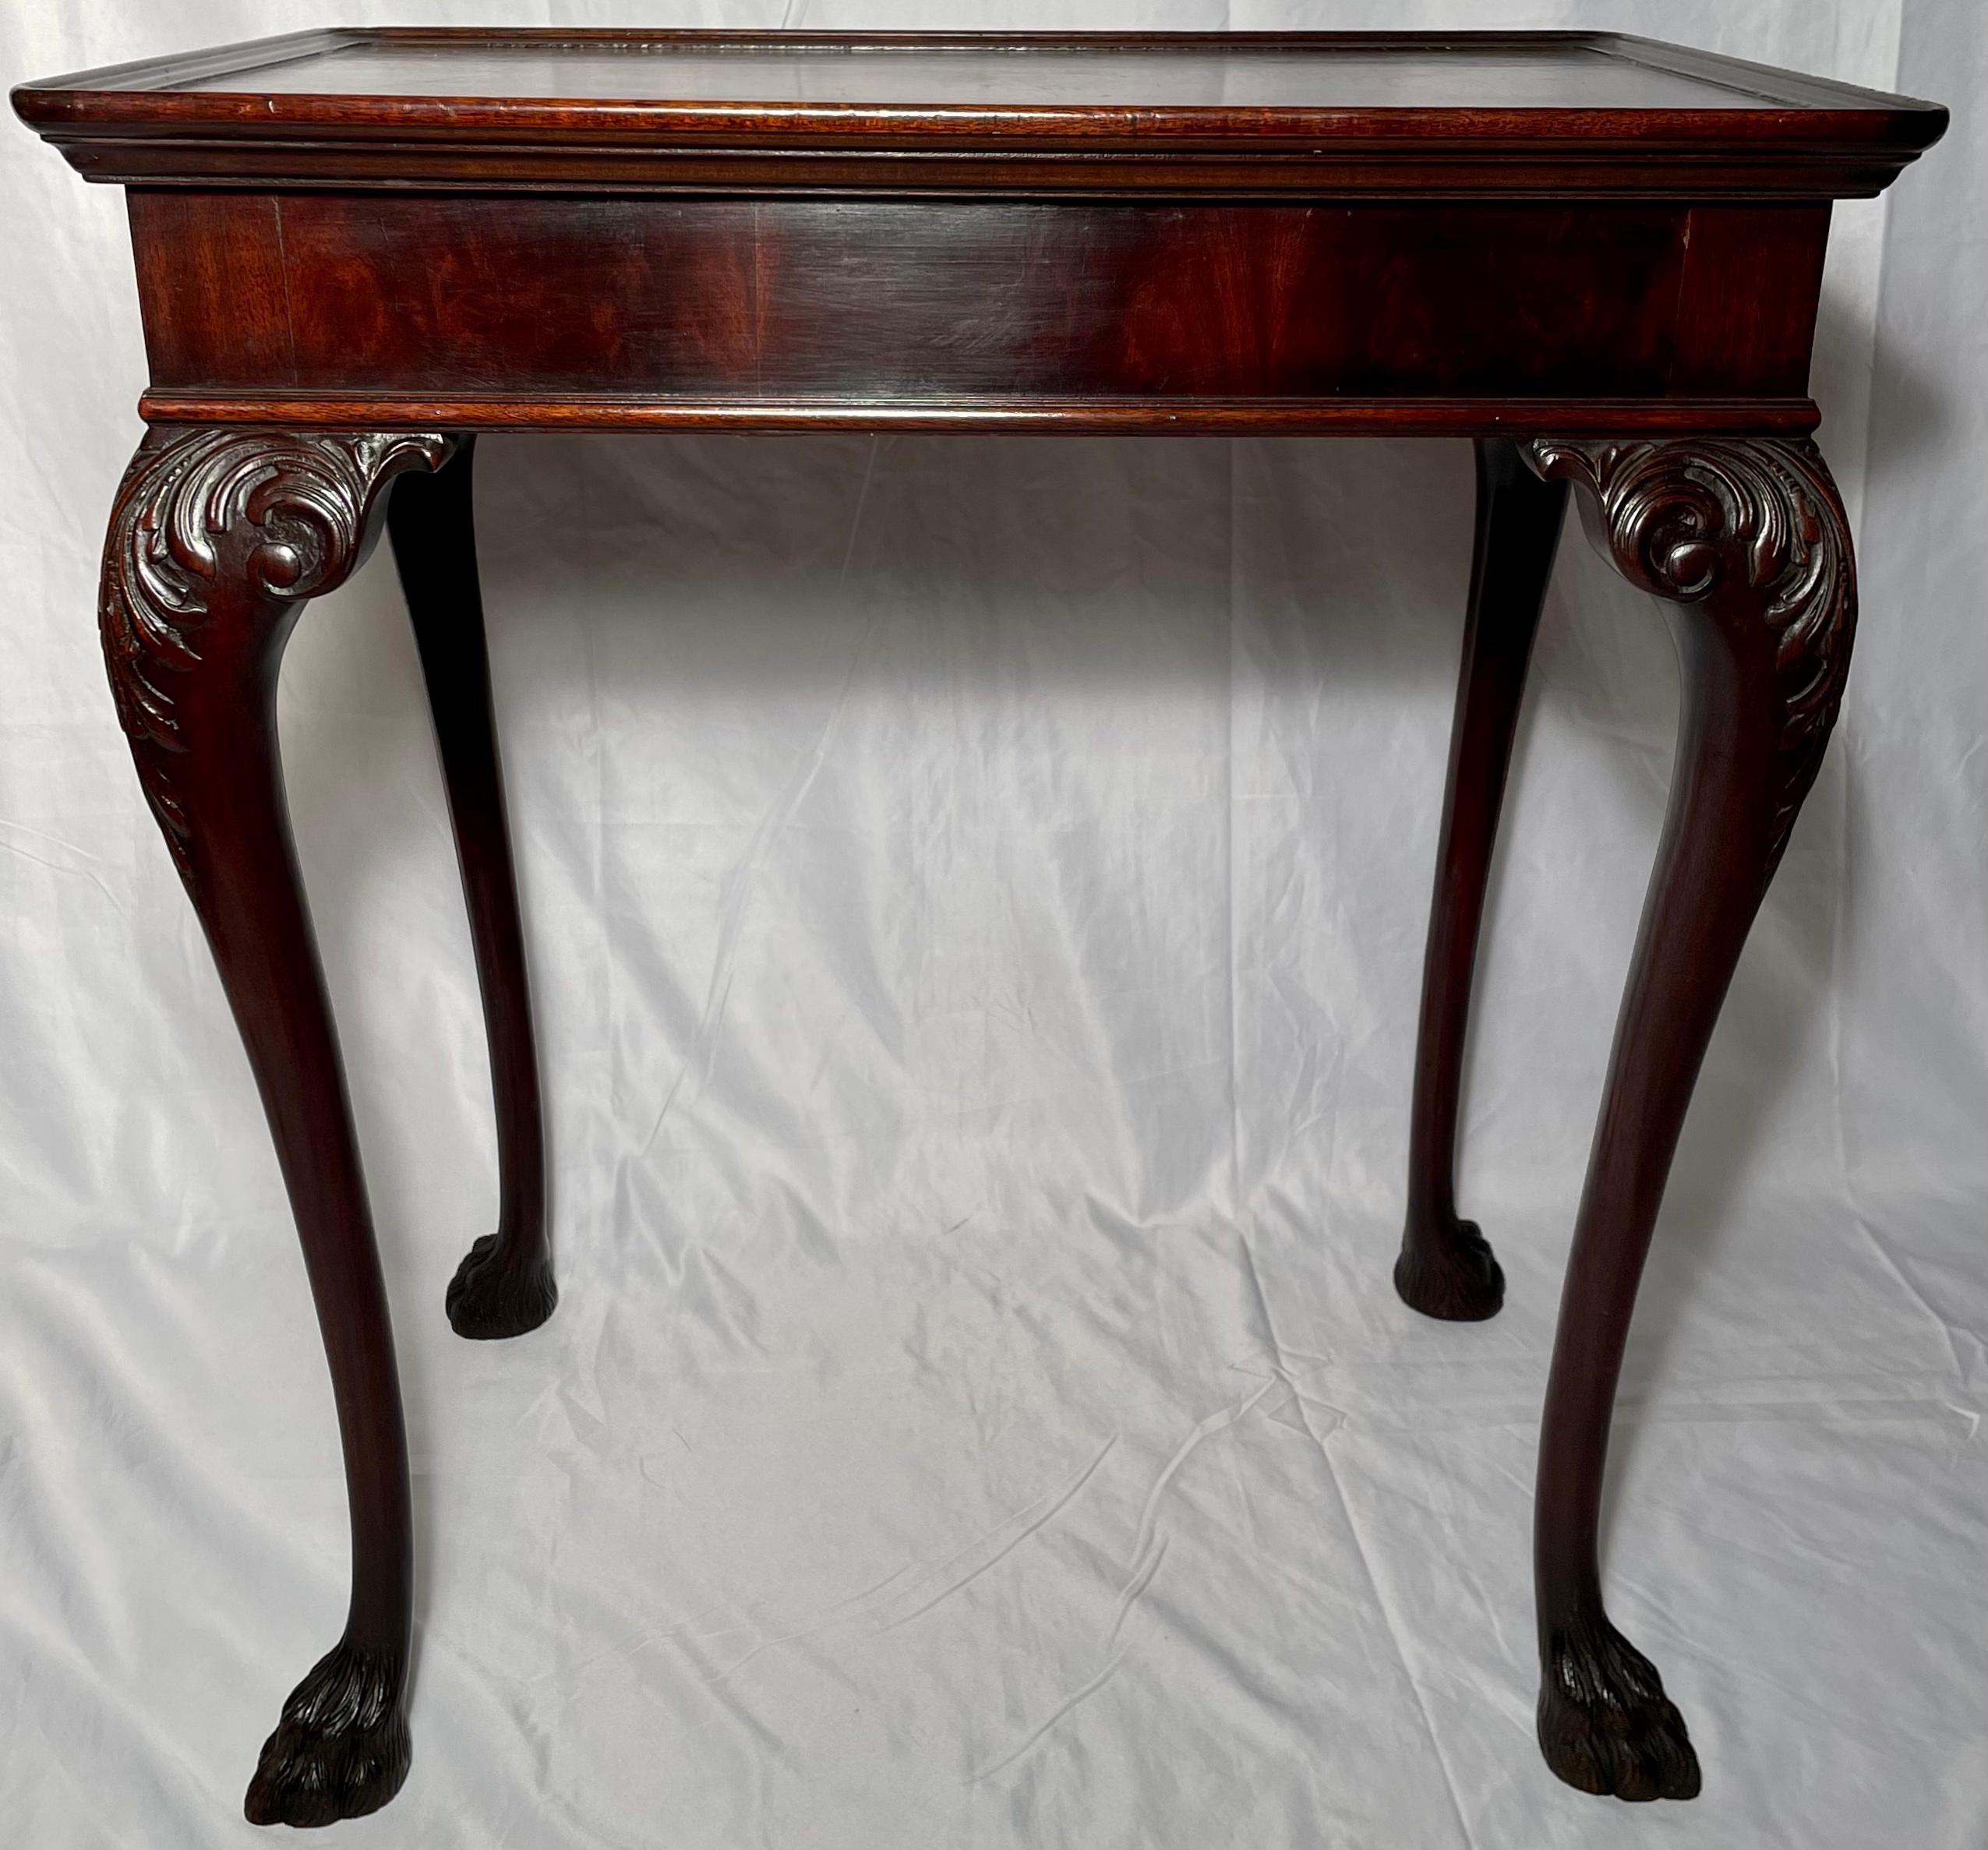 Pair Antique English Chippendale carved mahogany side tables, circa 1890s.